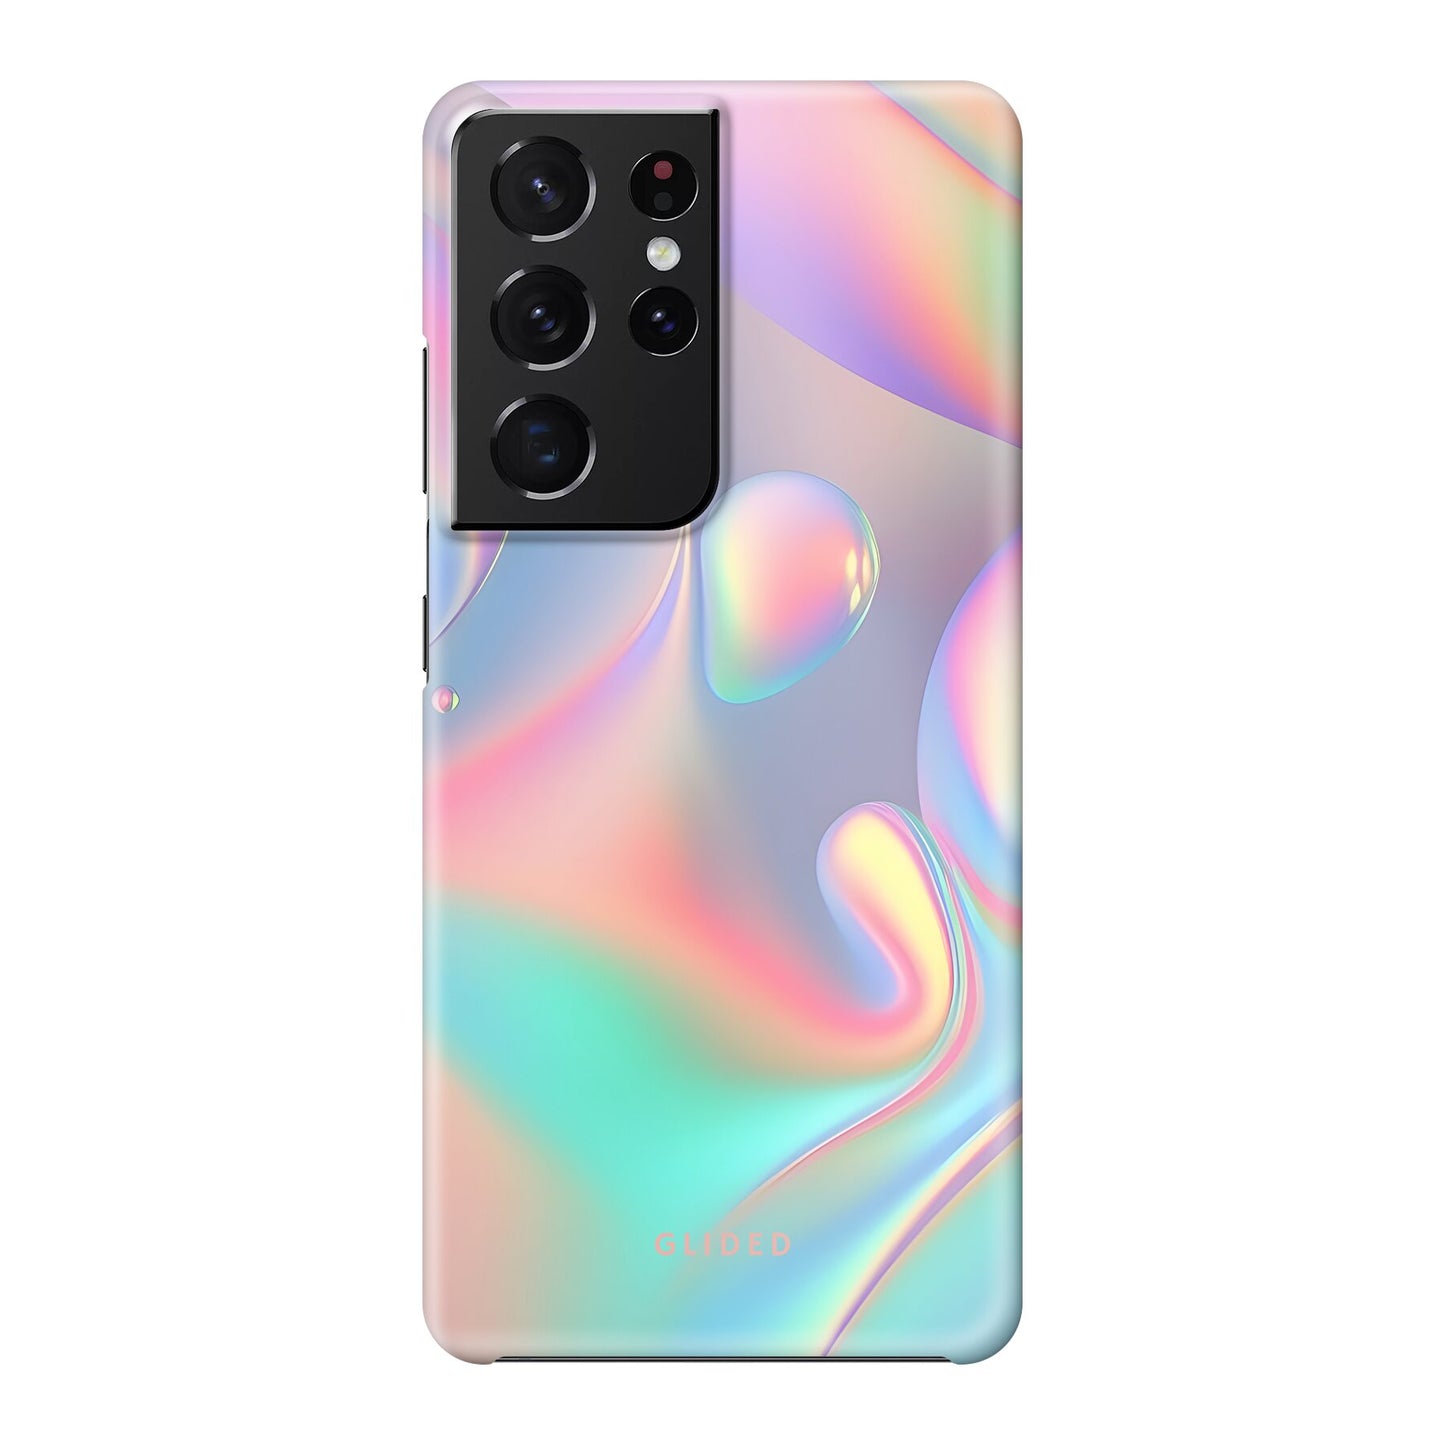 Holographic Aesthetic - Samsung Galaxy S21 Ultra 5G Handyhülle Hard Case